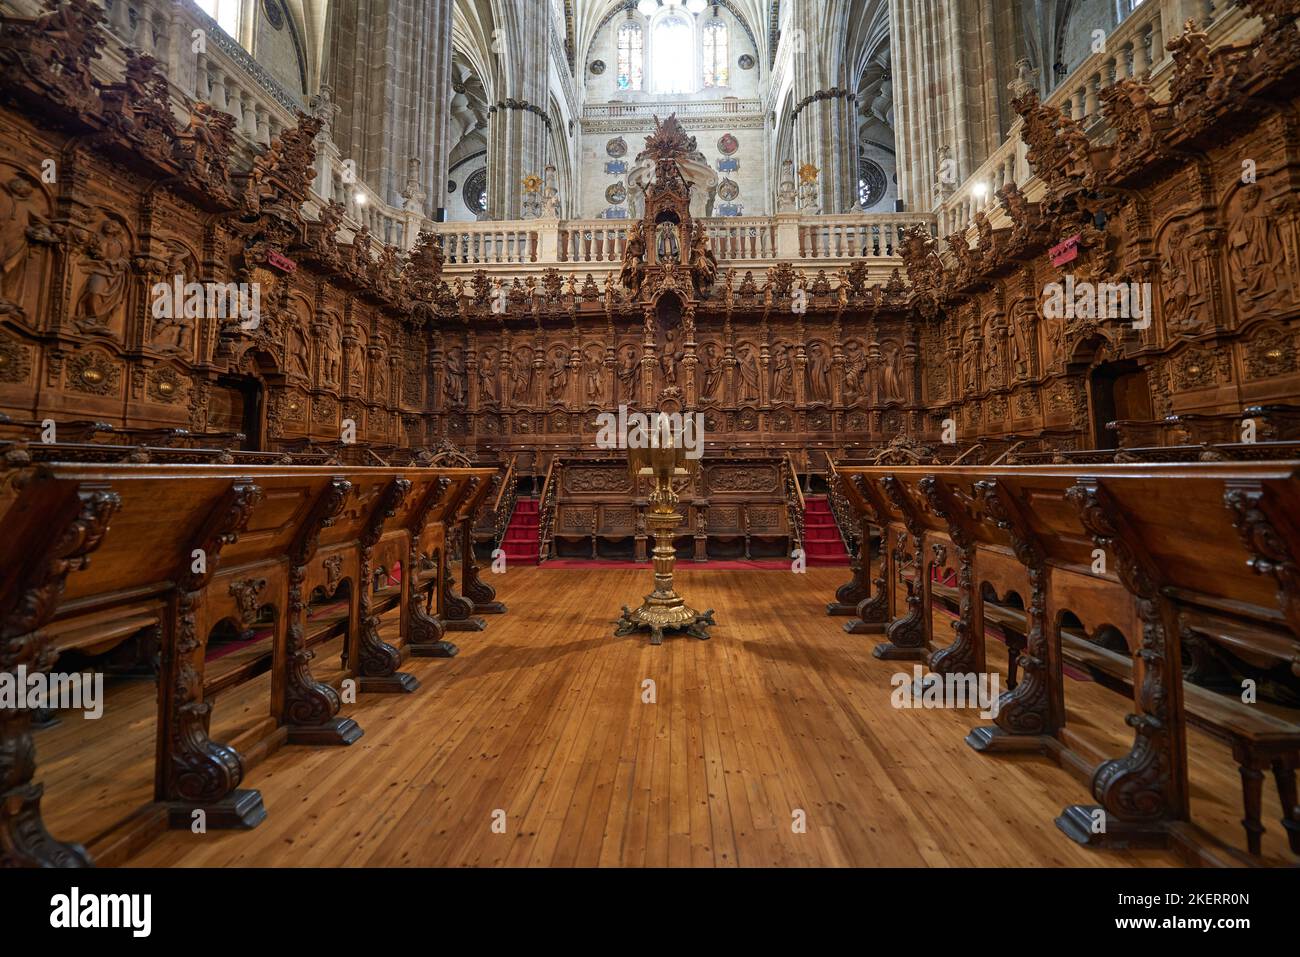 View of the interior of the New Cathedral of Salamanca, Salamanca City, Spain, Europe. Stock Photo